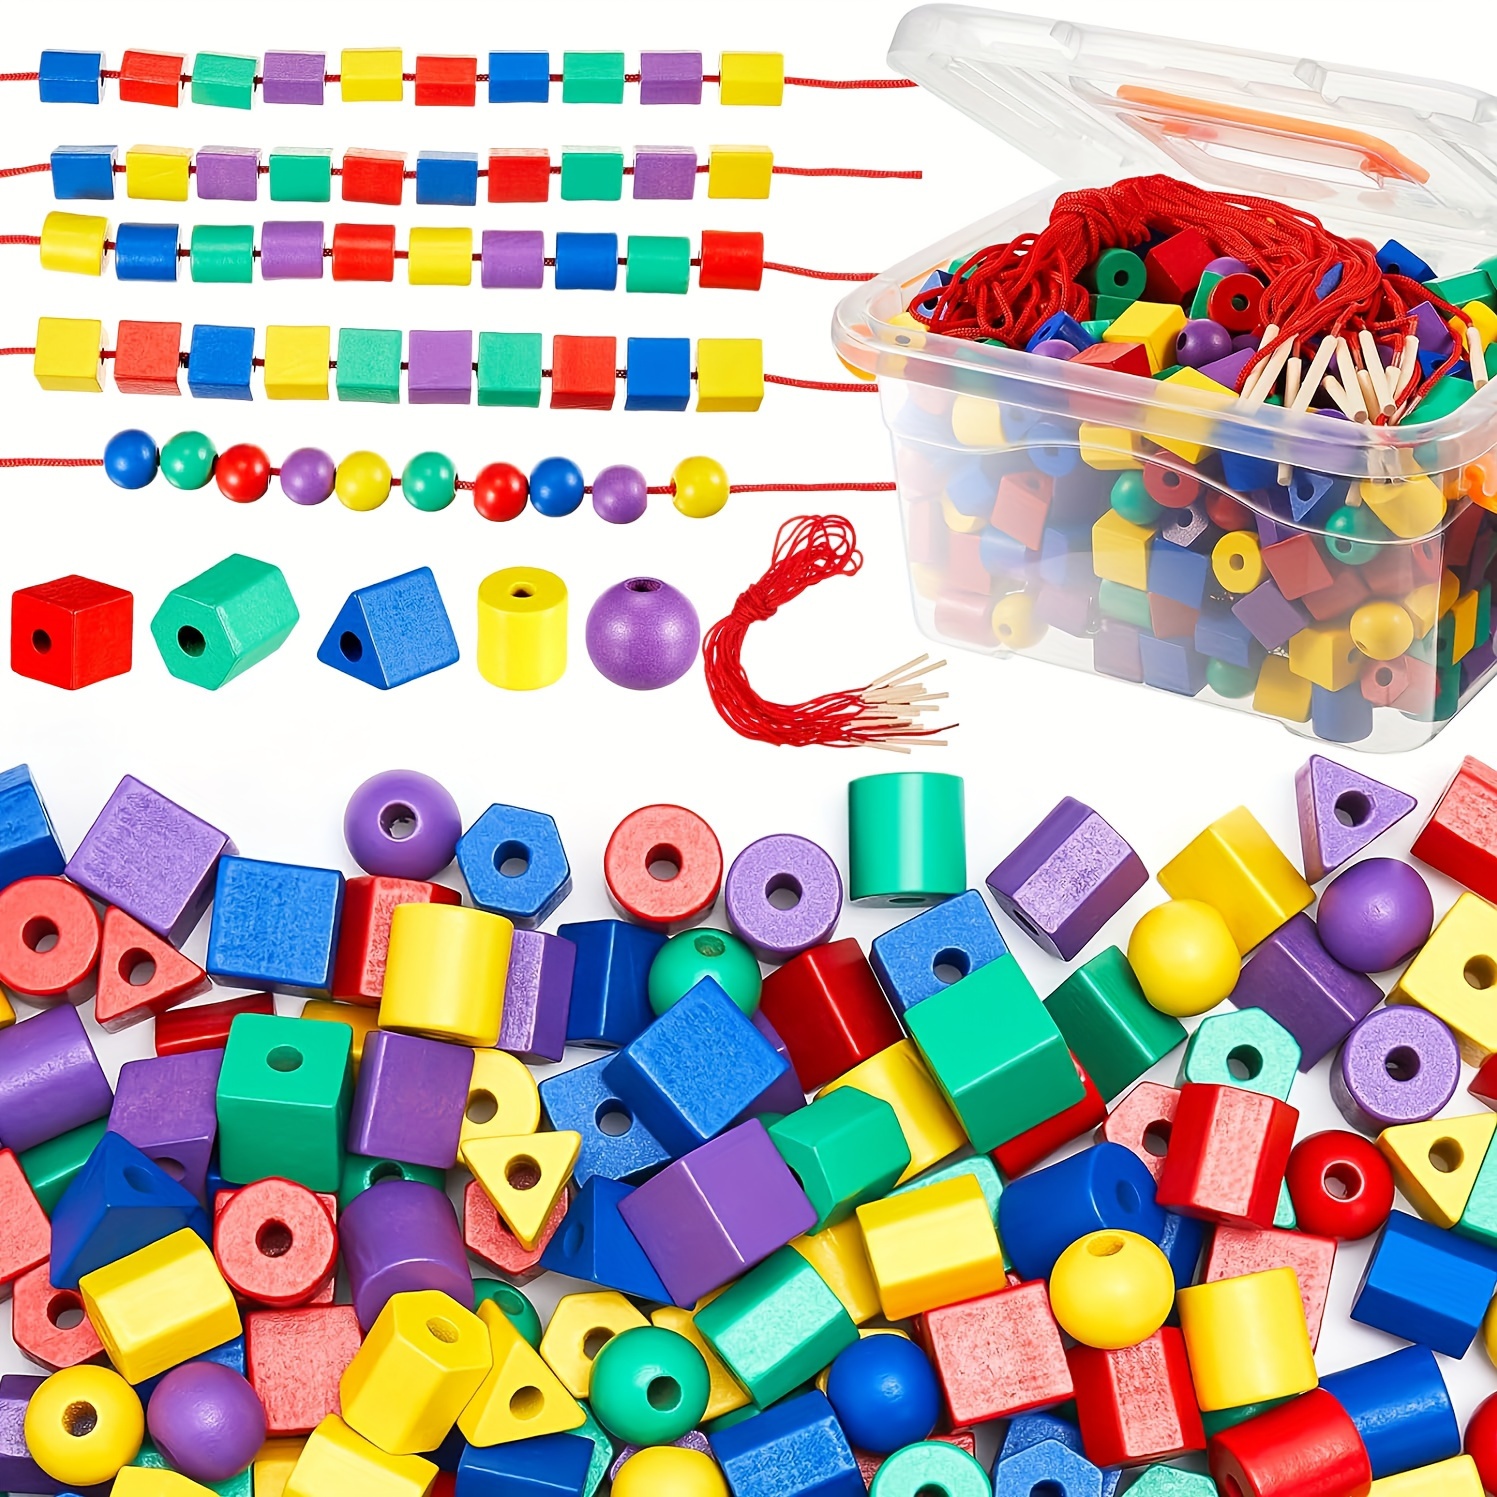 

80-piece Montessori Lacing Beads Set For Toddlers - Color & Shape Sorter Toy With String And Bag, Perfect For Preschool Occupational Therapy